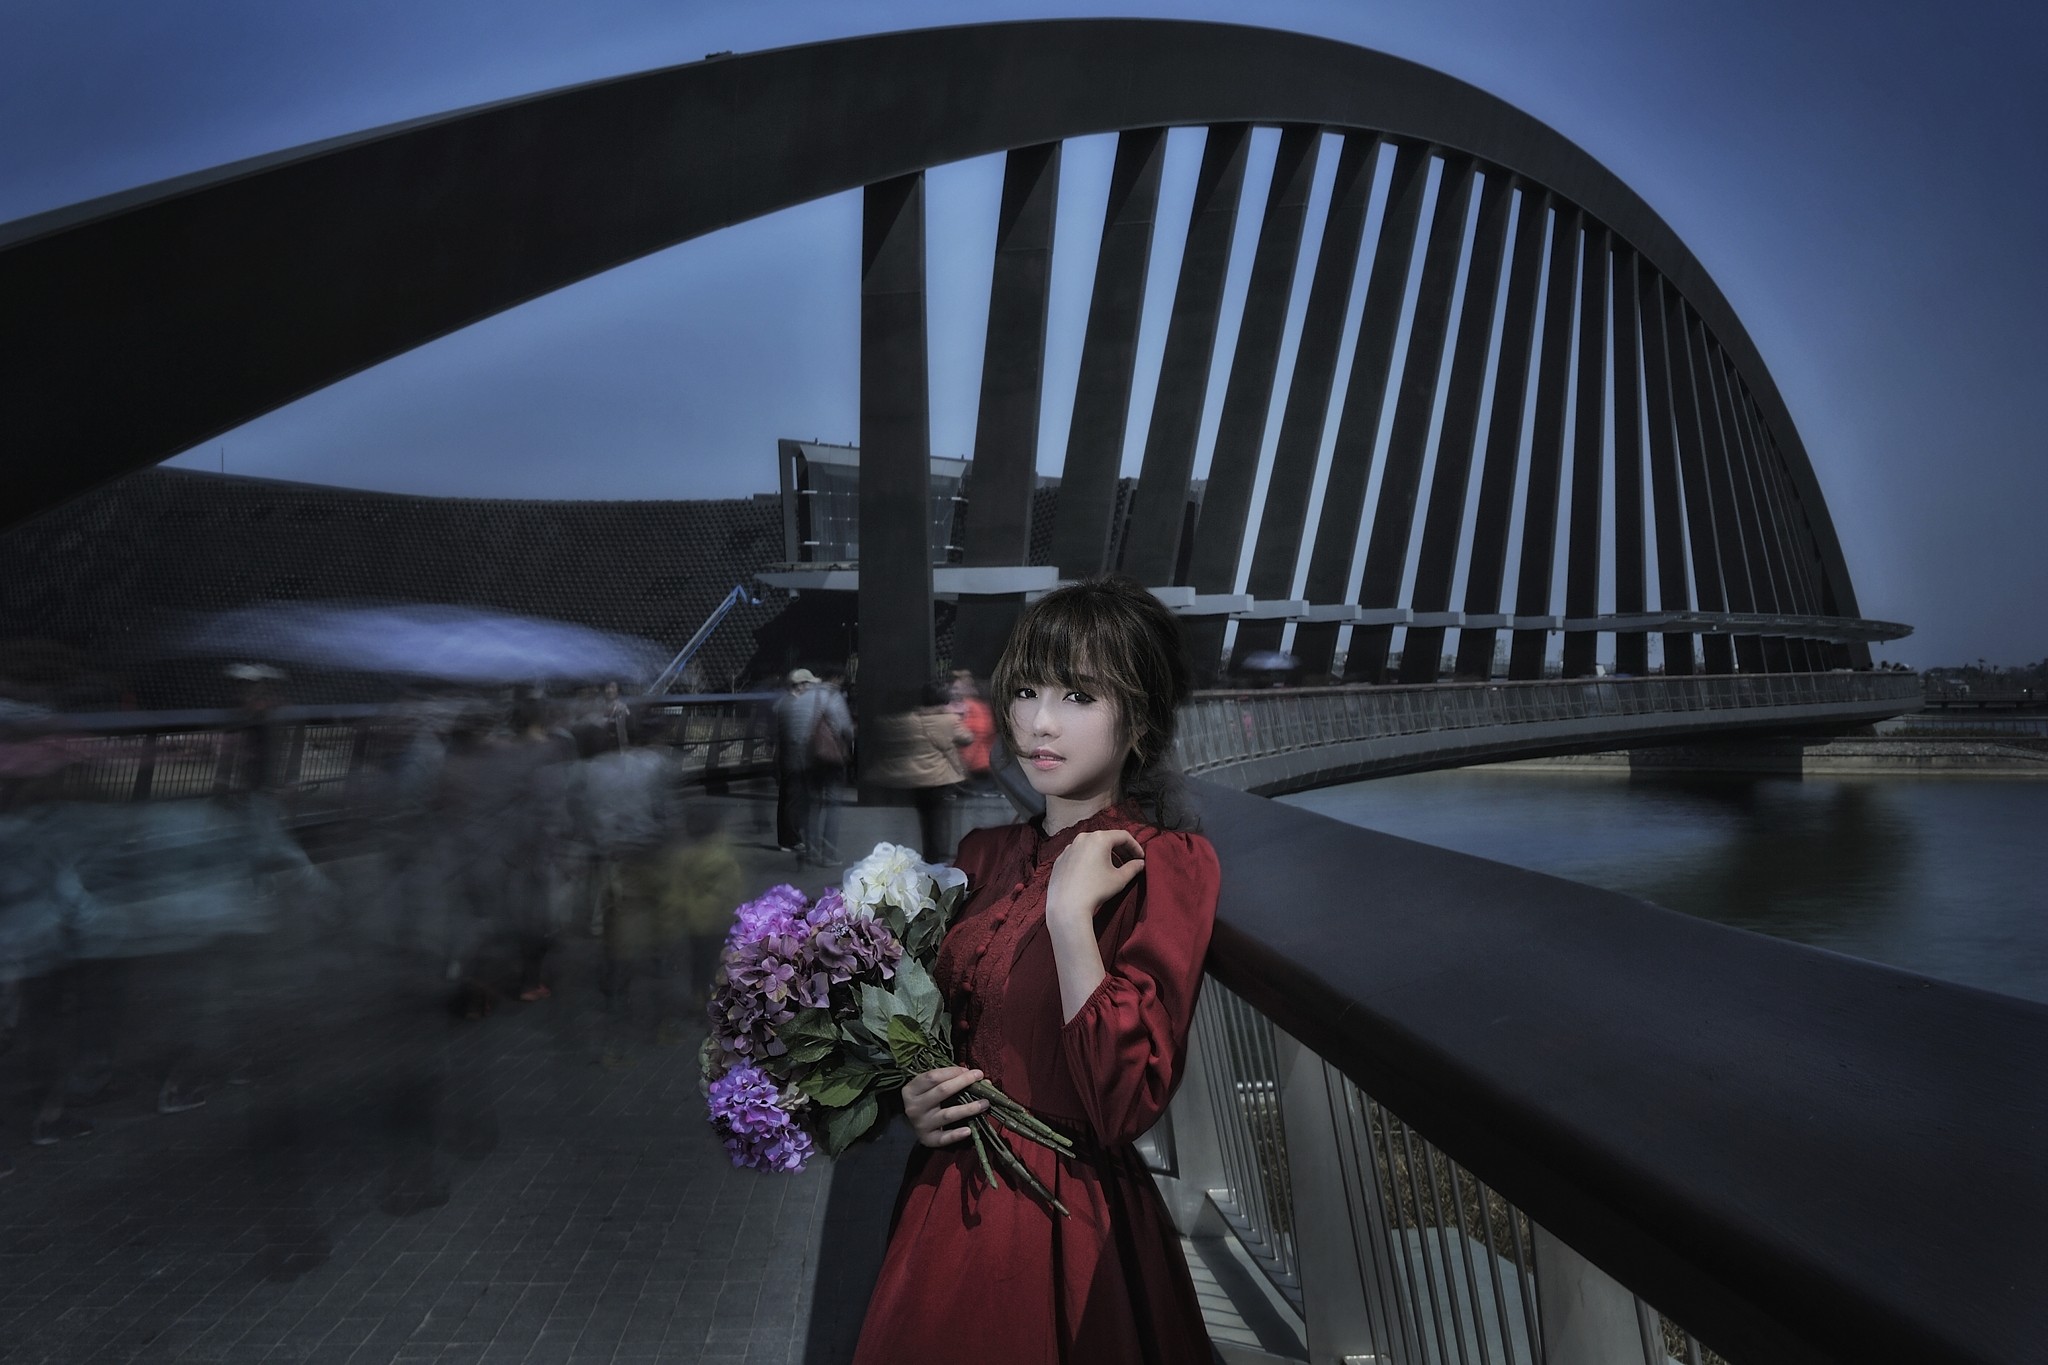 People 2048x1365 red dress brunette bouquets flowers standing bridge women Asian model plants urban women outdoors looking at viewer dress red clothing